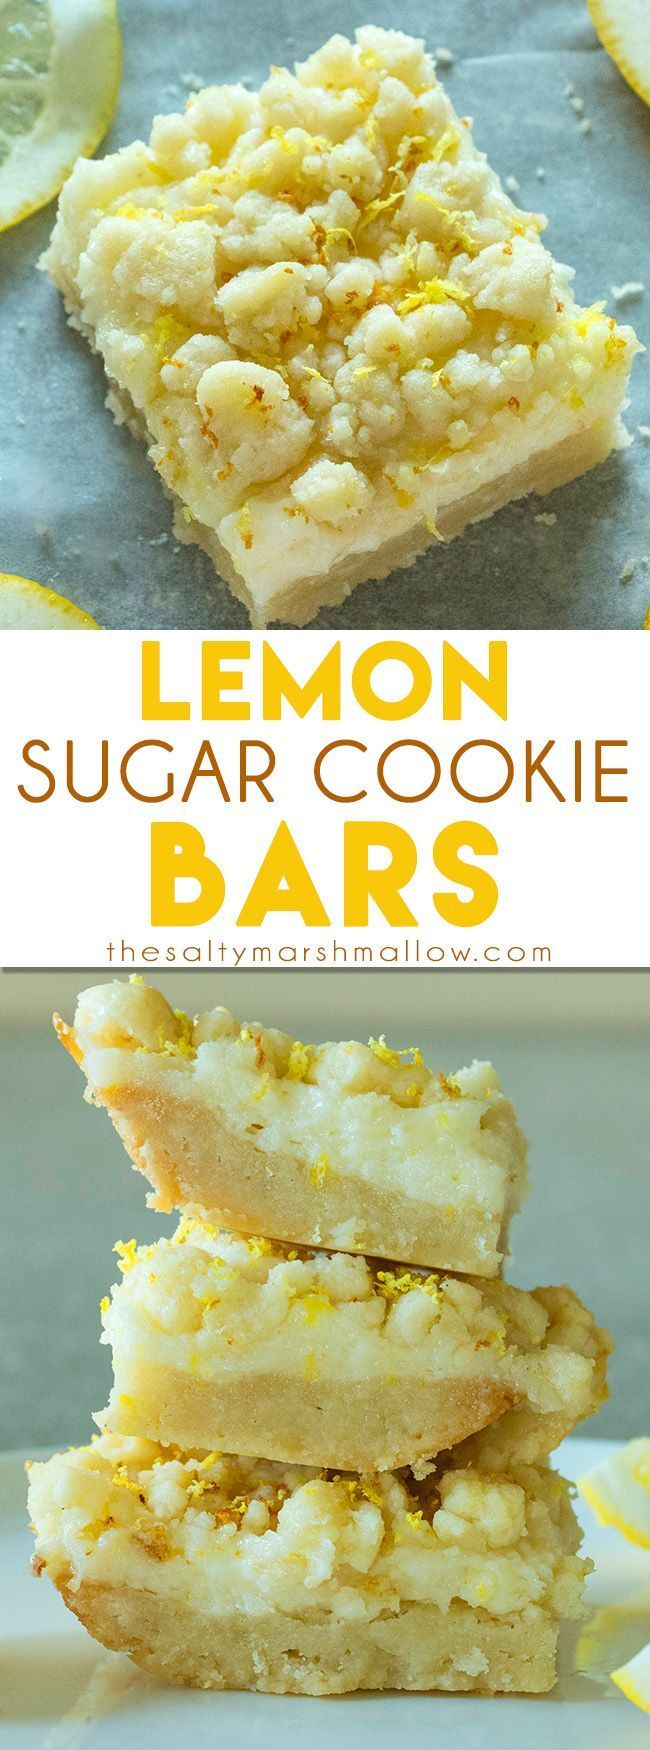 Lemon Sugar Cookie Bars:  These lemon bars are one of the best easy to make lemon desserts! They have a sugar cookie crust and